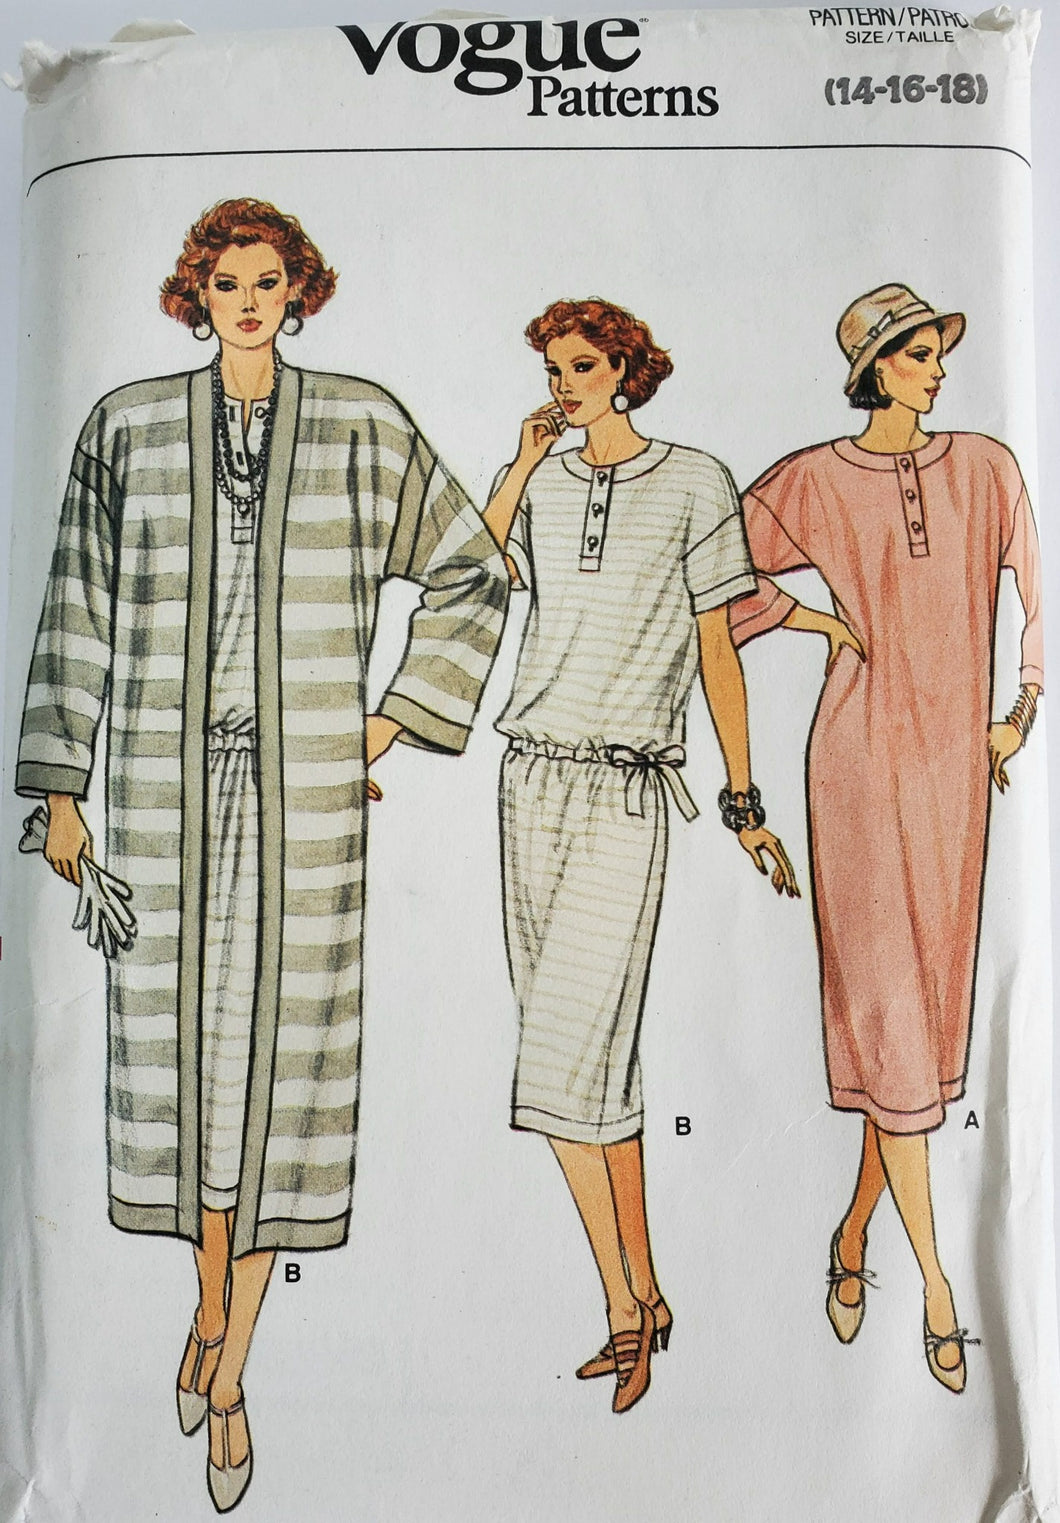 Vogue Pattern 9218, UNCUT and UNUSED Coat and Dress, Misses Size 14-16-18, Rare